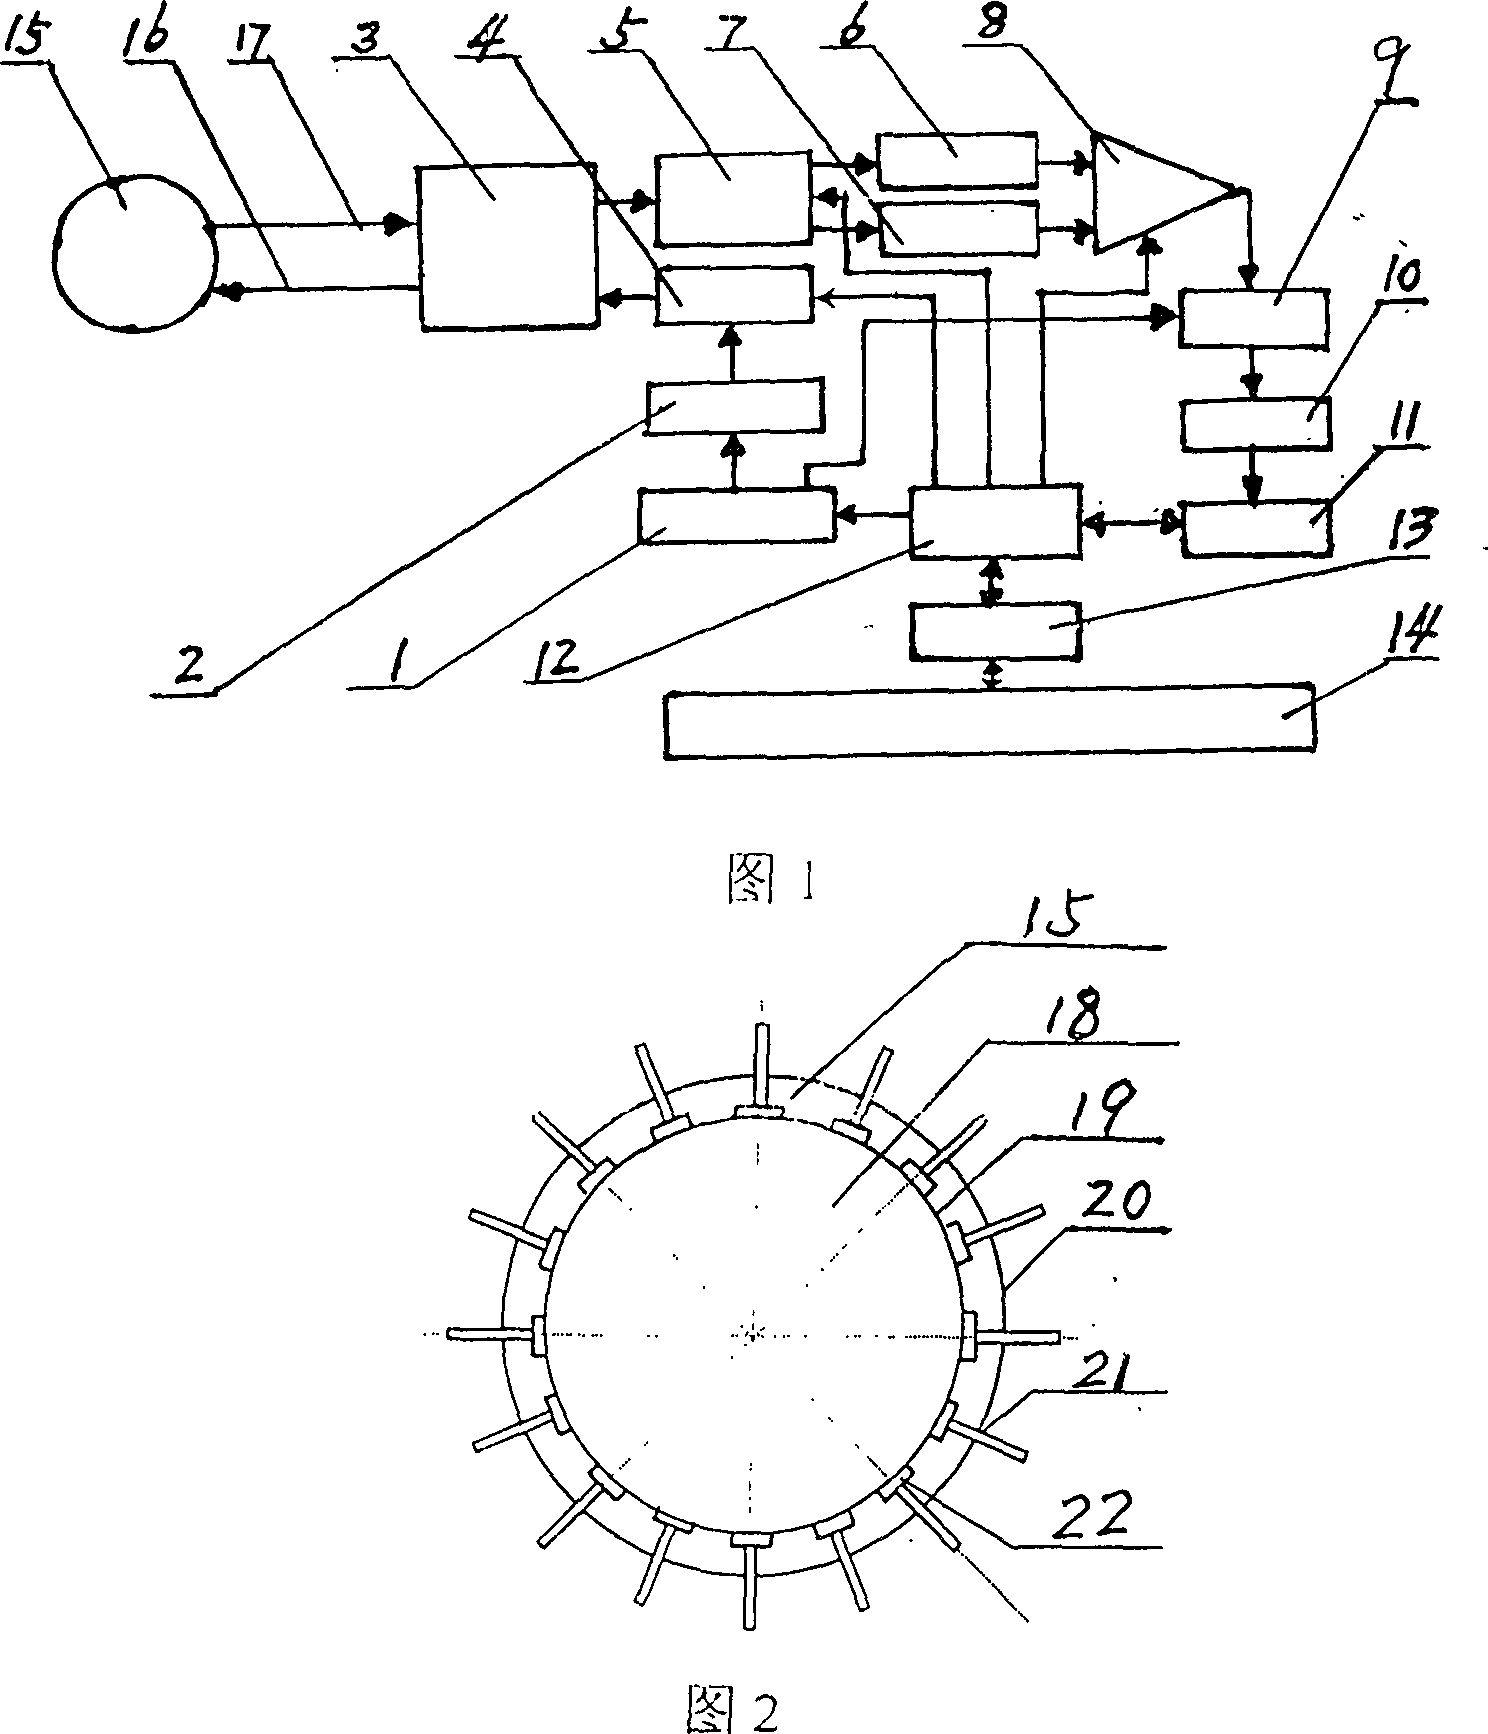 Identifier of gas liquid two phase flow pattern based on resistance chromatographic imaging and its method